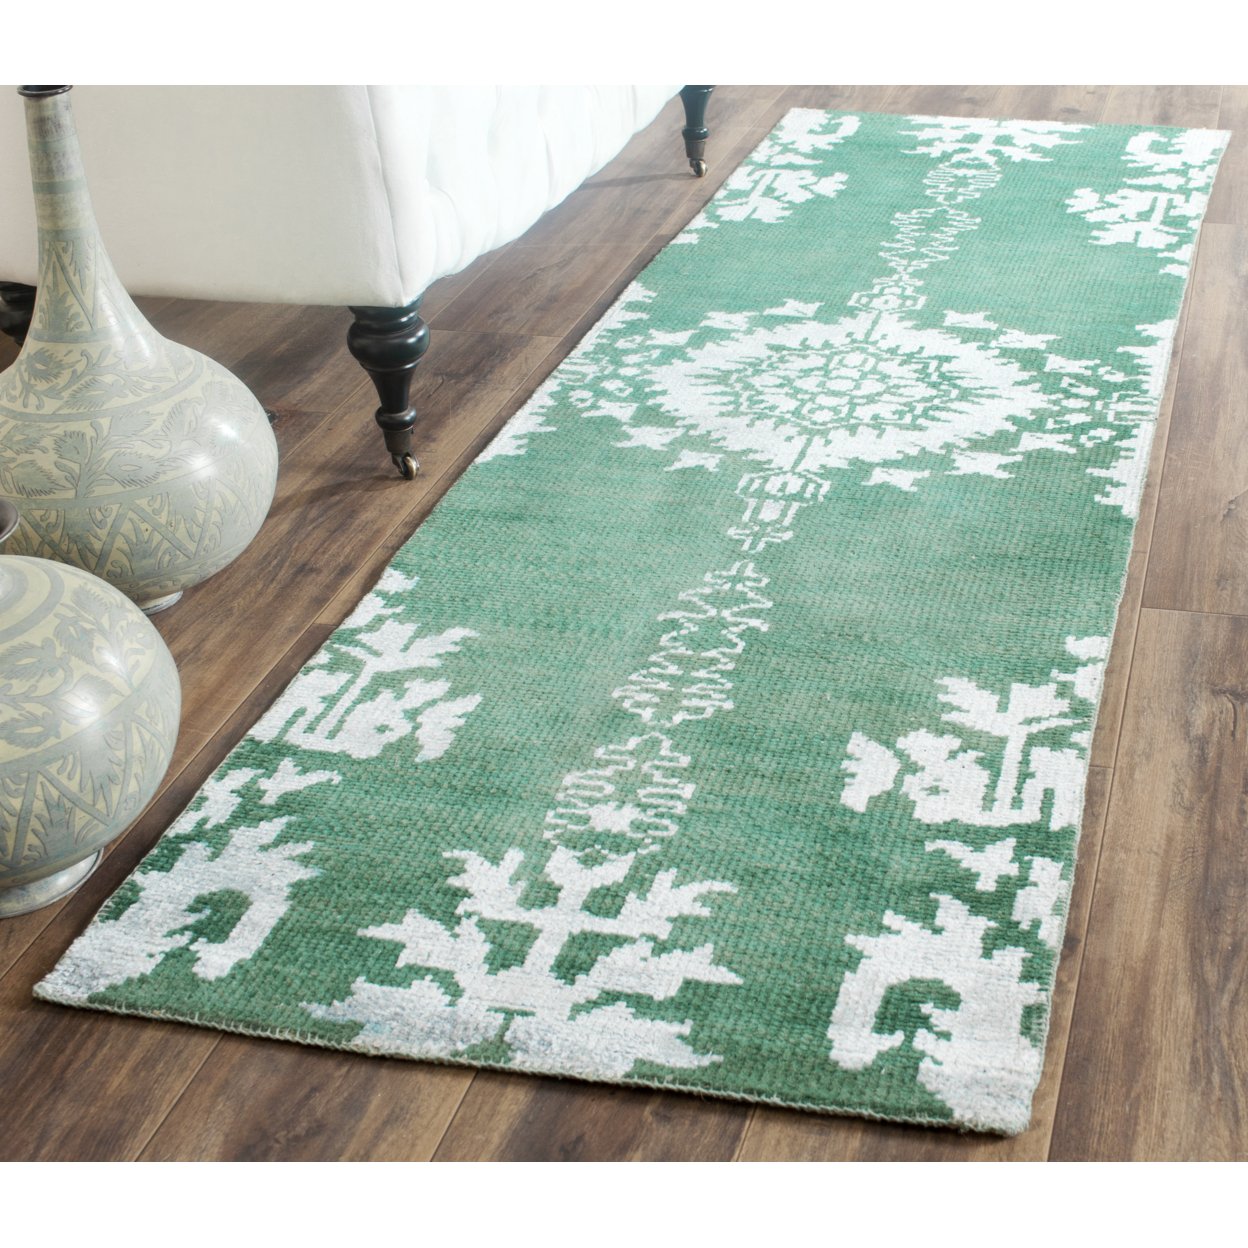 SAFAVIEH Stone Wash STW235D Hand-knotted Emerald Rug - 2' 6 X 6'